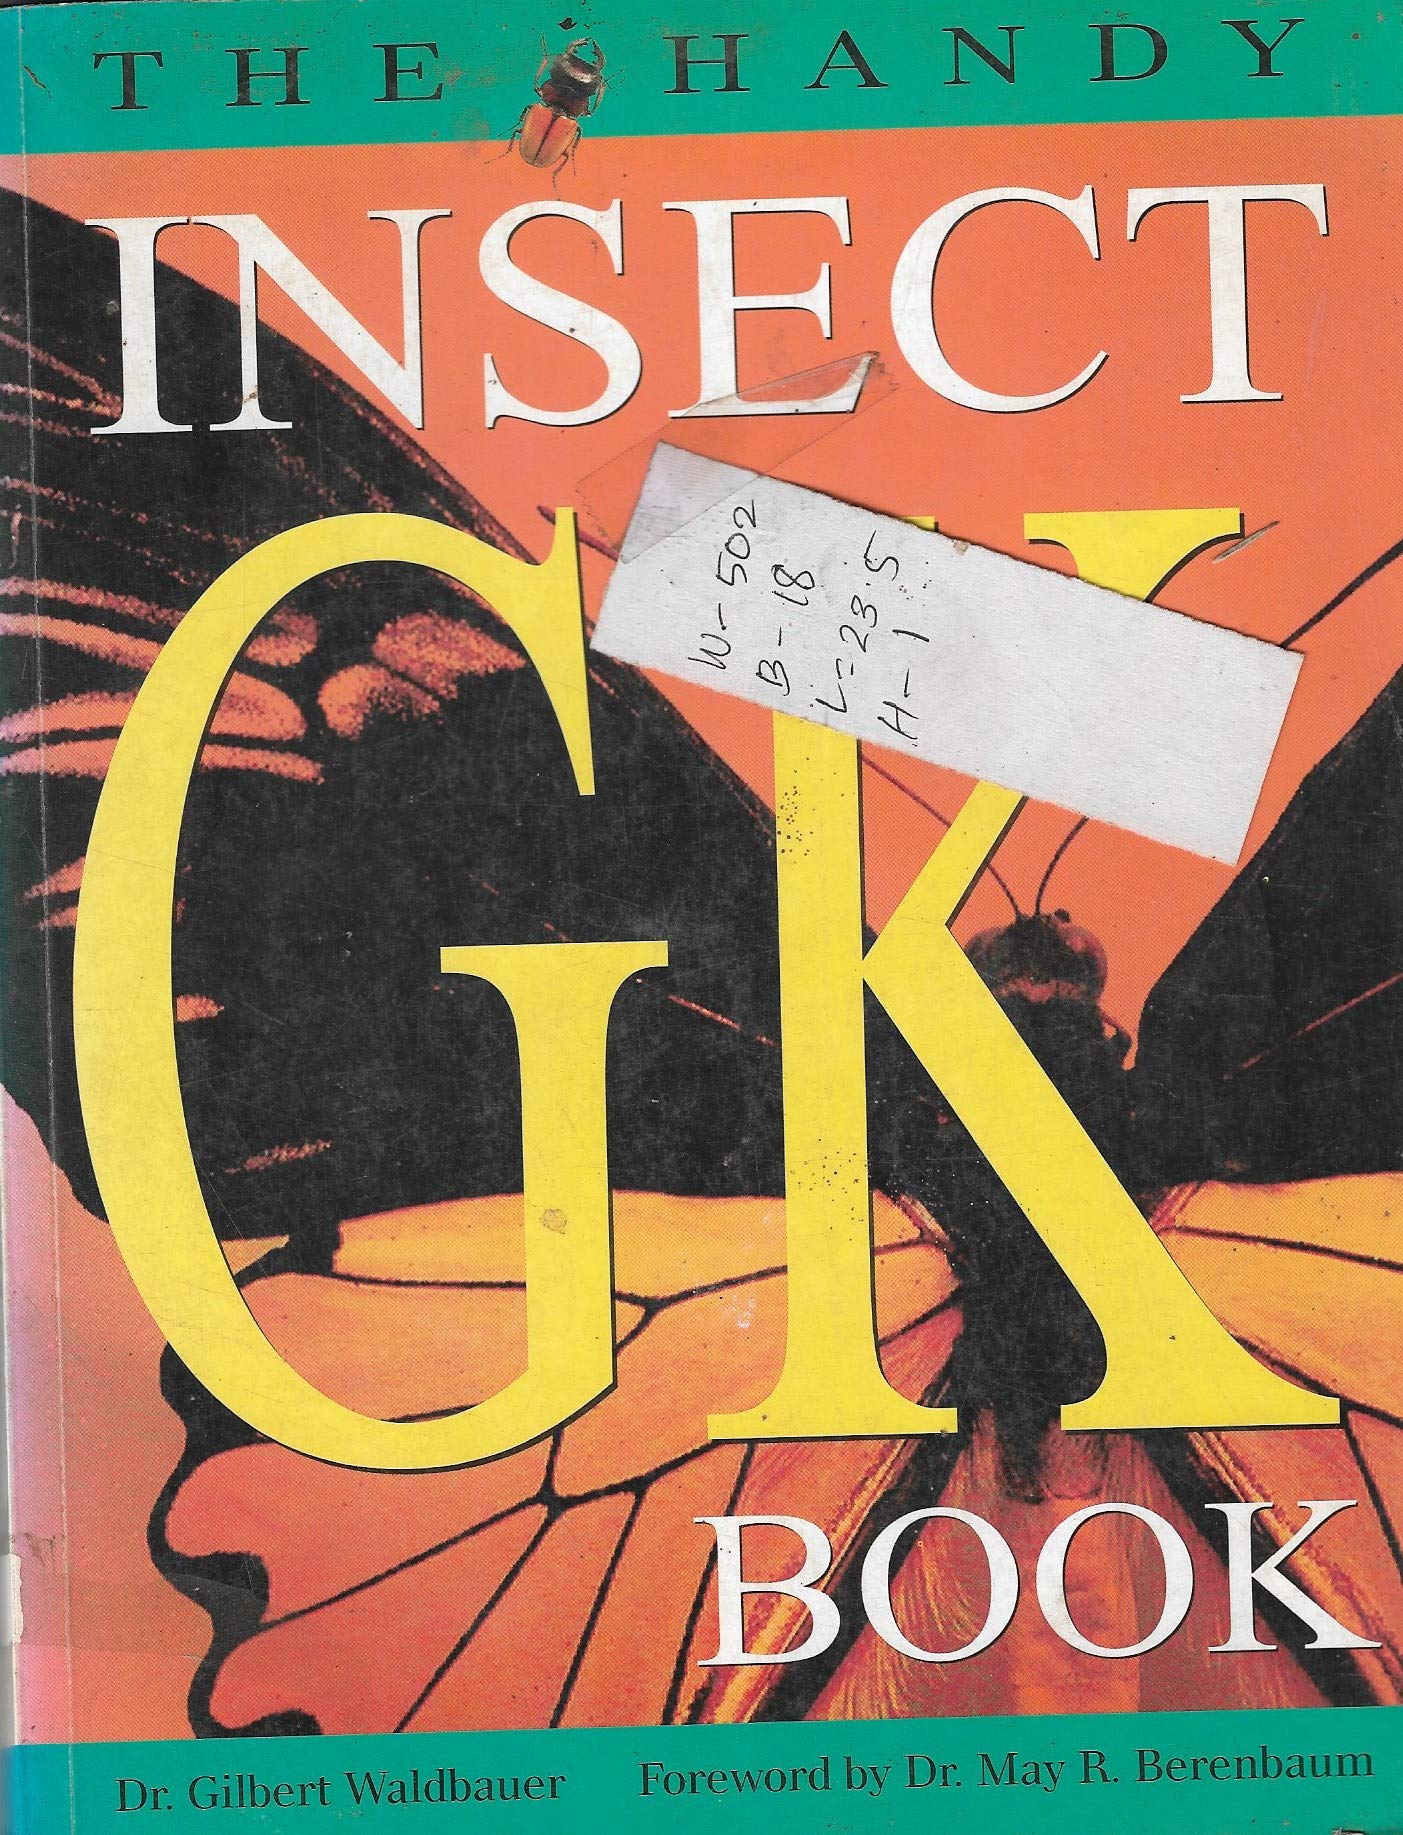 The Handy Insect Gk Book